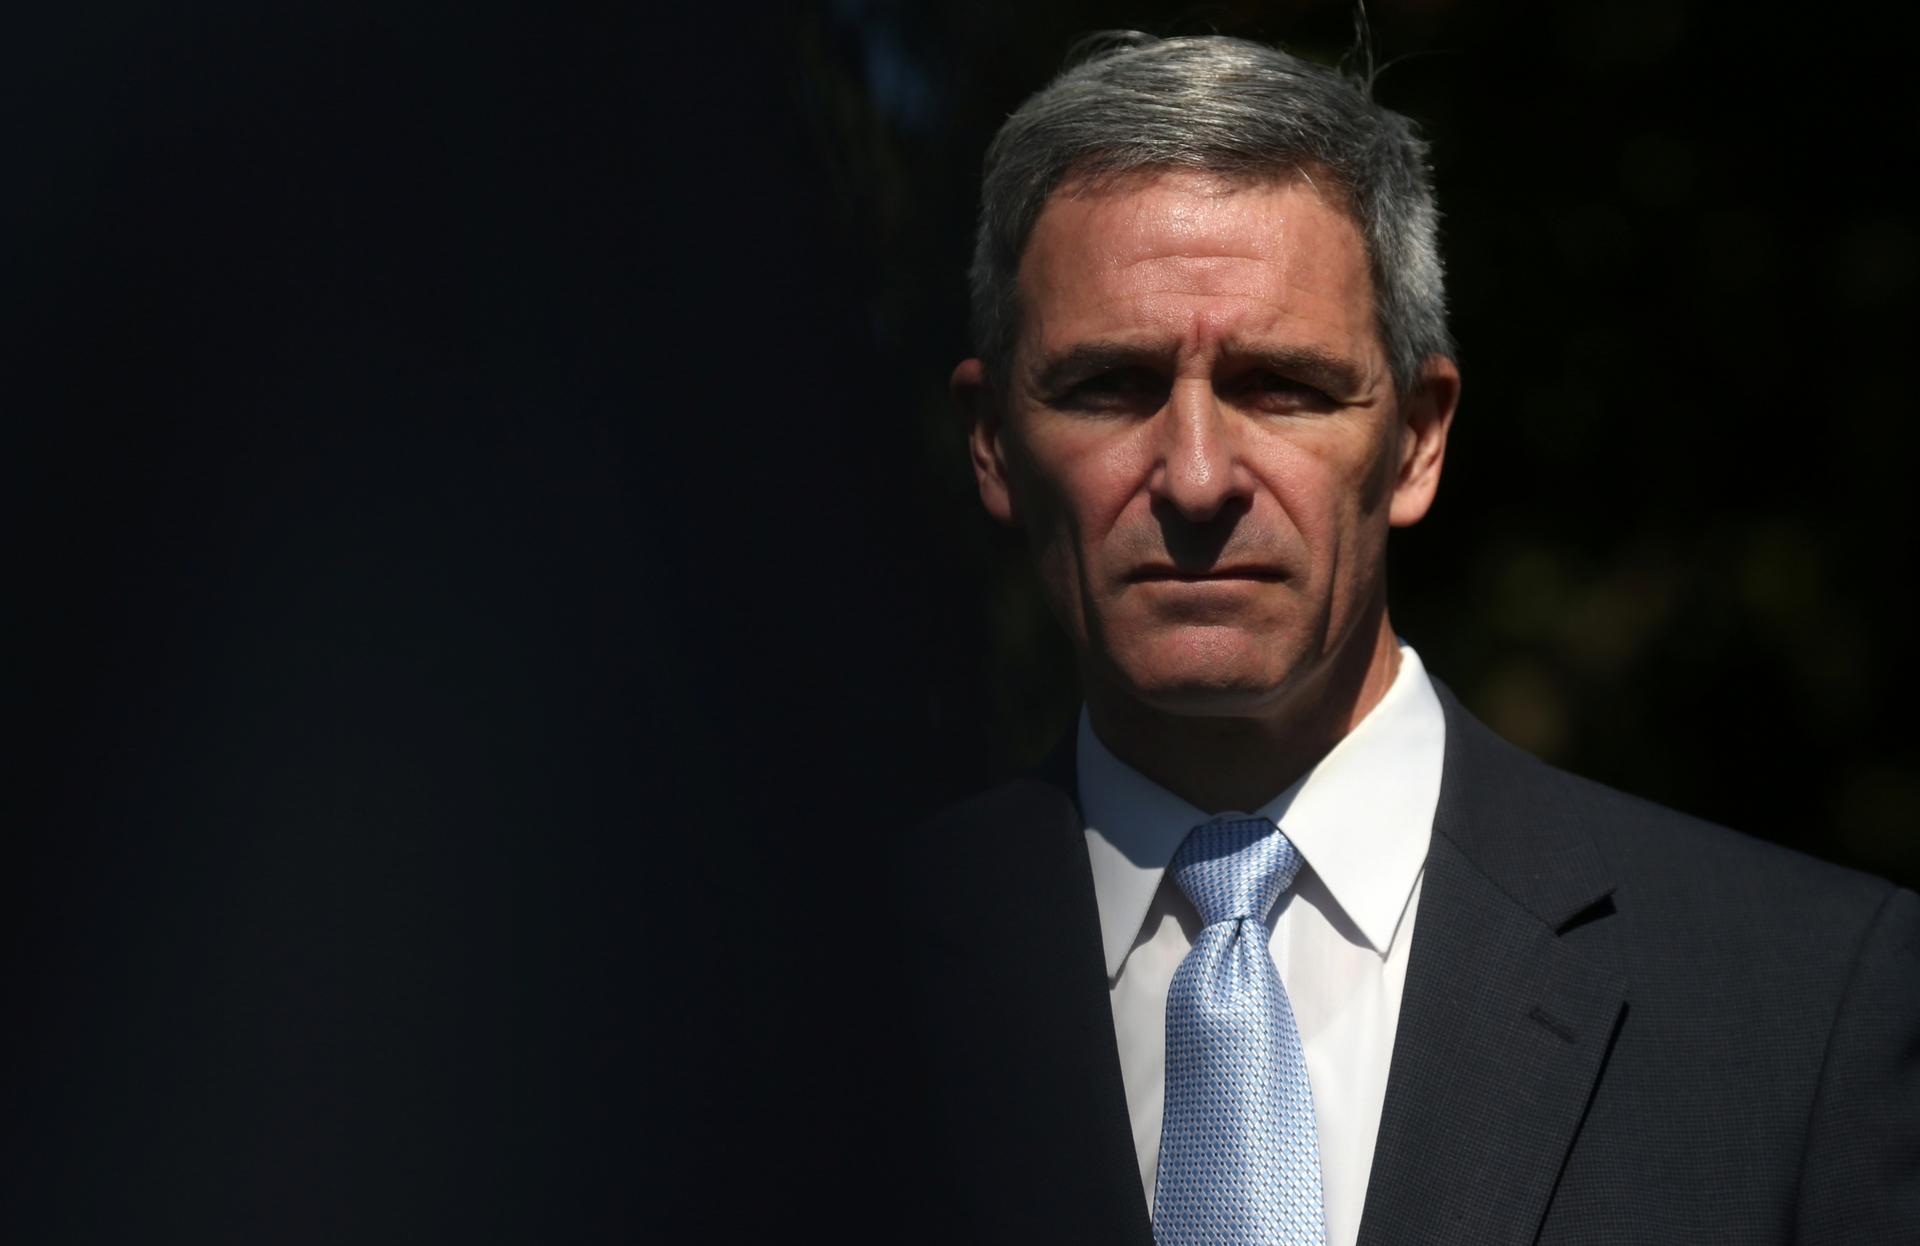 Immigration hawk Ken Cuccinelli, acting director of US Citizenship and Immigration Services, speaks to the news media at the White House in Washington, DC, on Sept. 27, 2019.